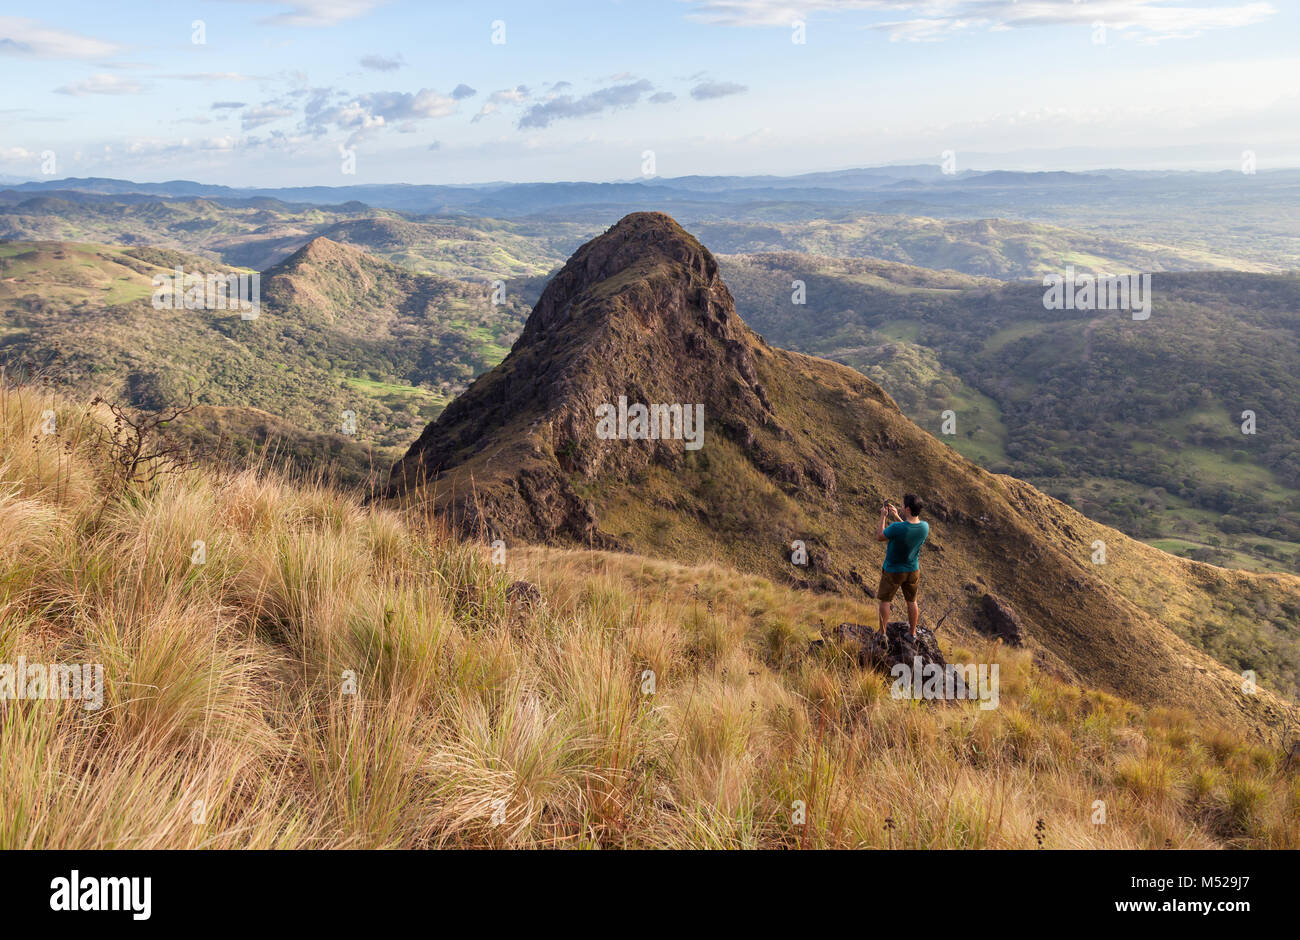 Man capturing the views of Guanacaste Costa Rica from the top of this local treasure, Cerro Pelado at sunset Stock Photo